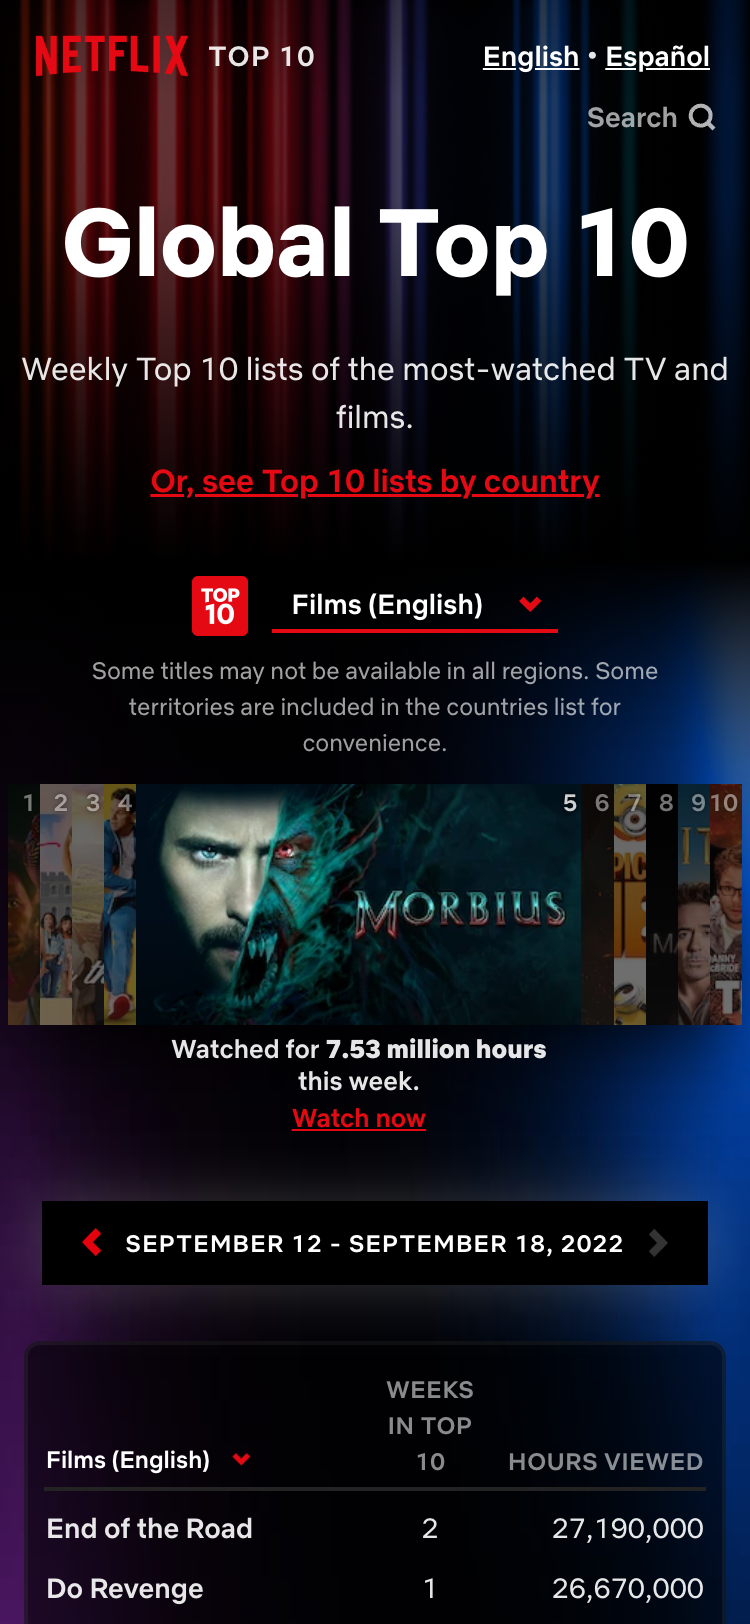 Mobile screenshot of the Netflix Top 10 website. The header contains the Netflix logo and a search bar. The page title is displayed in large lettering and in the center of the screen there is a carousel of images showing the top 10 English films. Below the film titles are listed in order along with the total hours viewed for each.